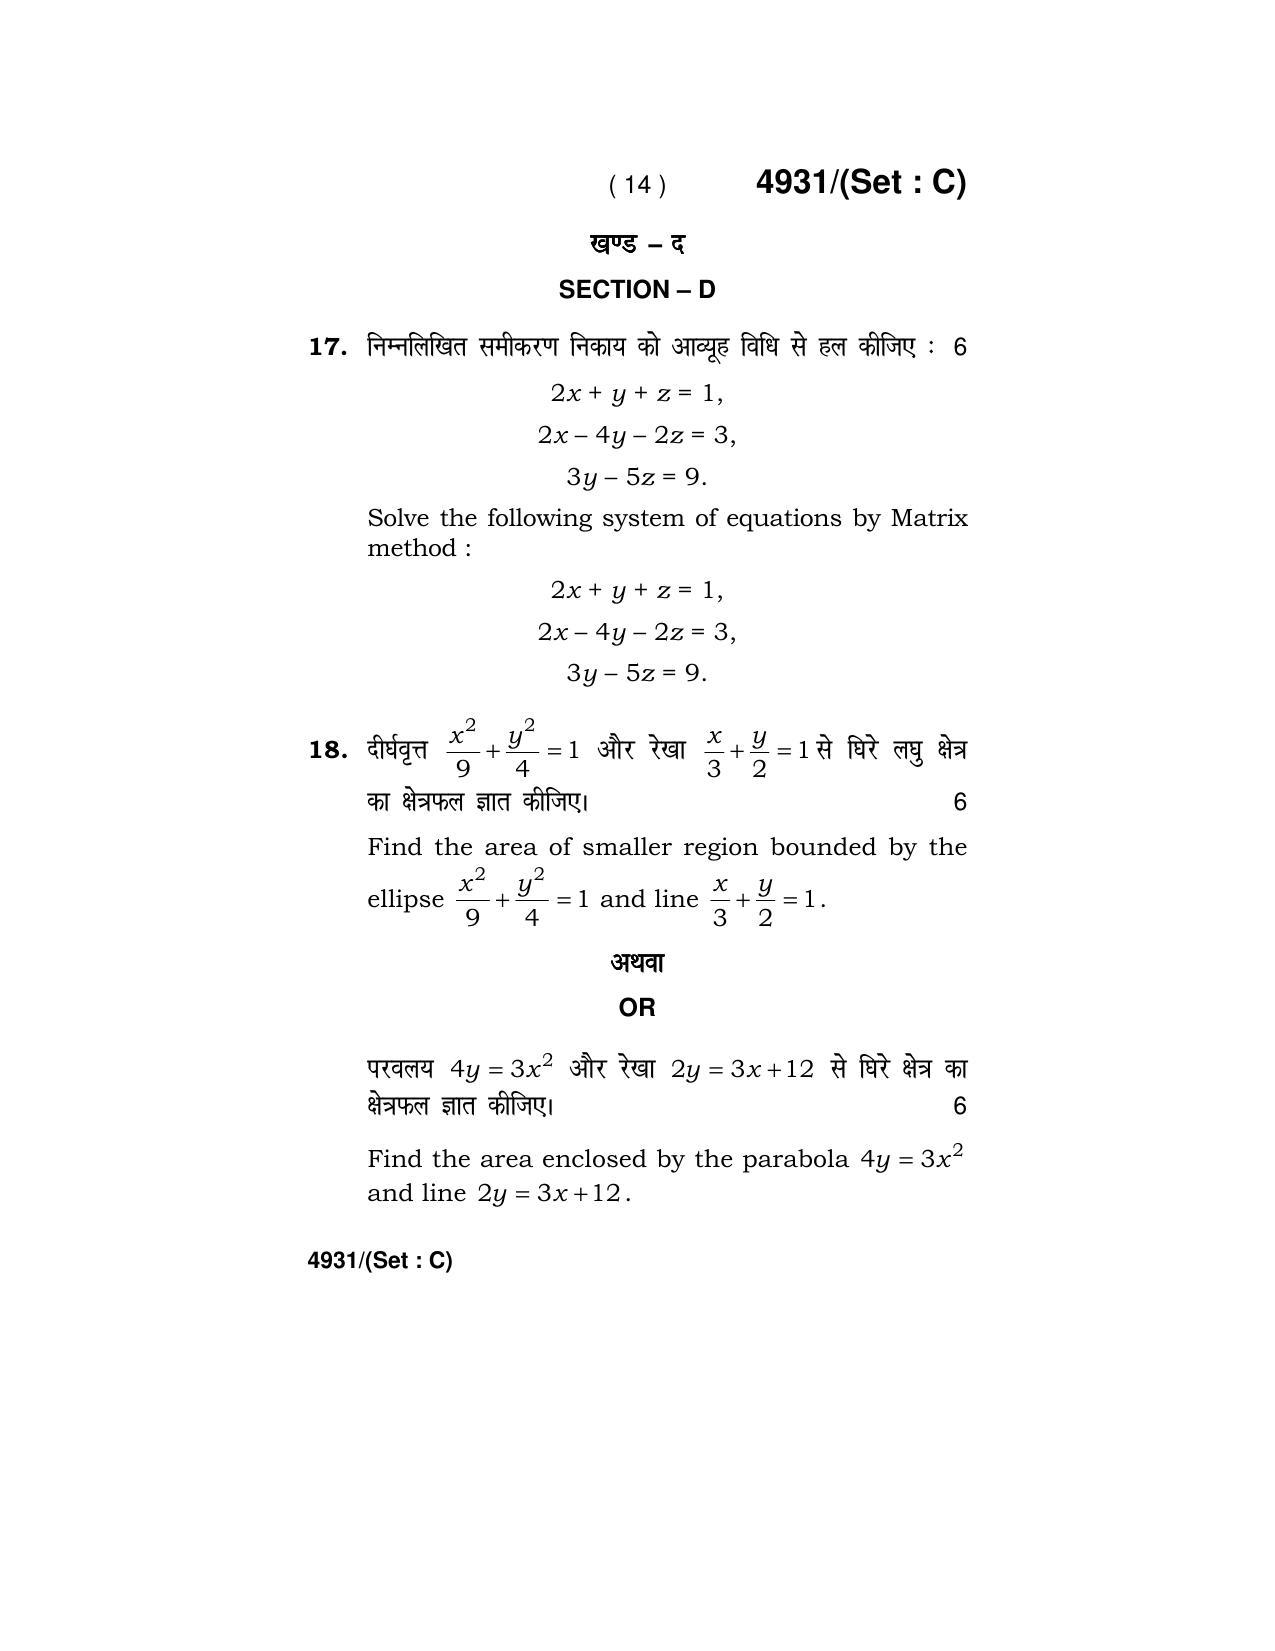 Haryana Board HBSE Class 12 Mathematics 2020 Question Paper - Page 46